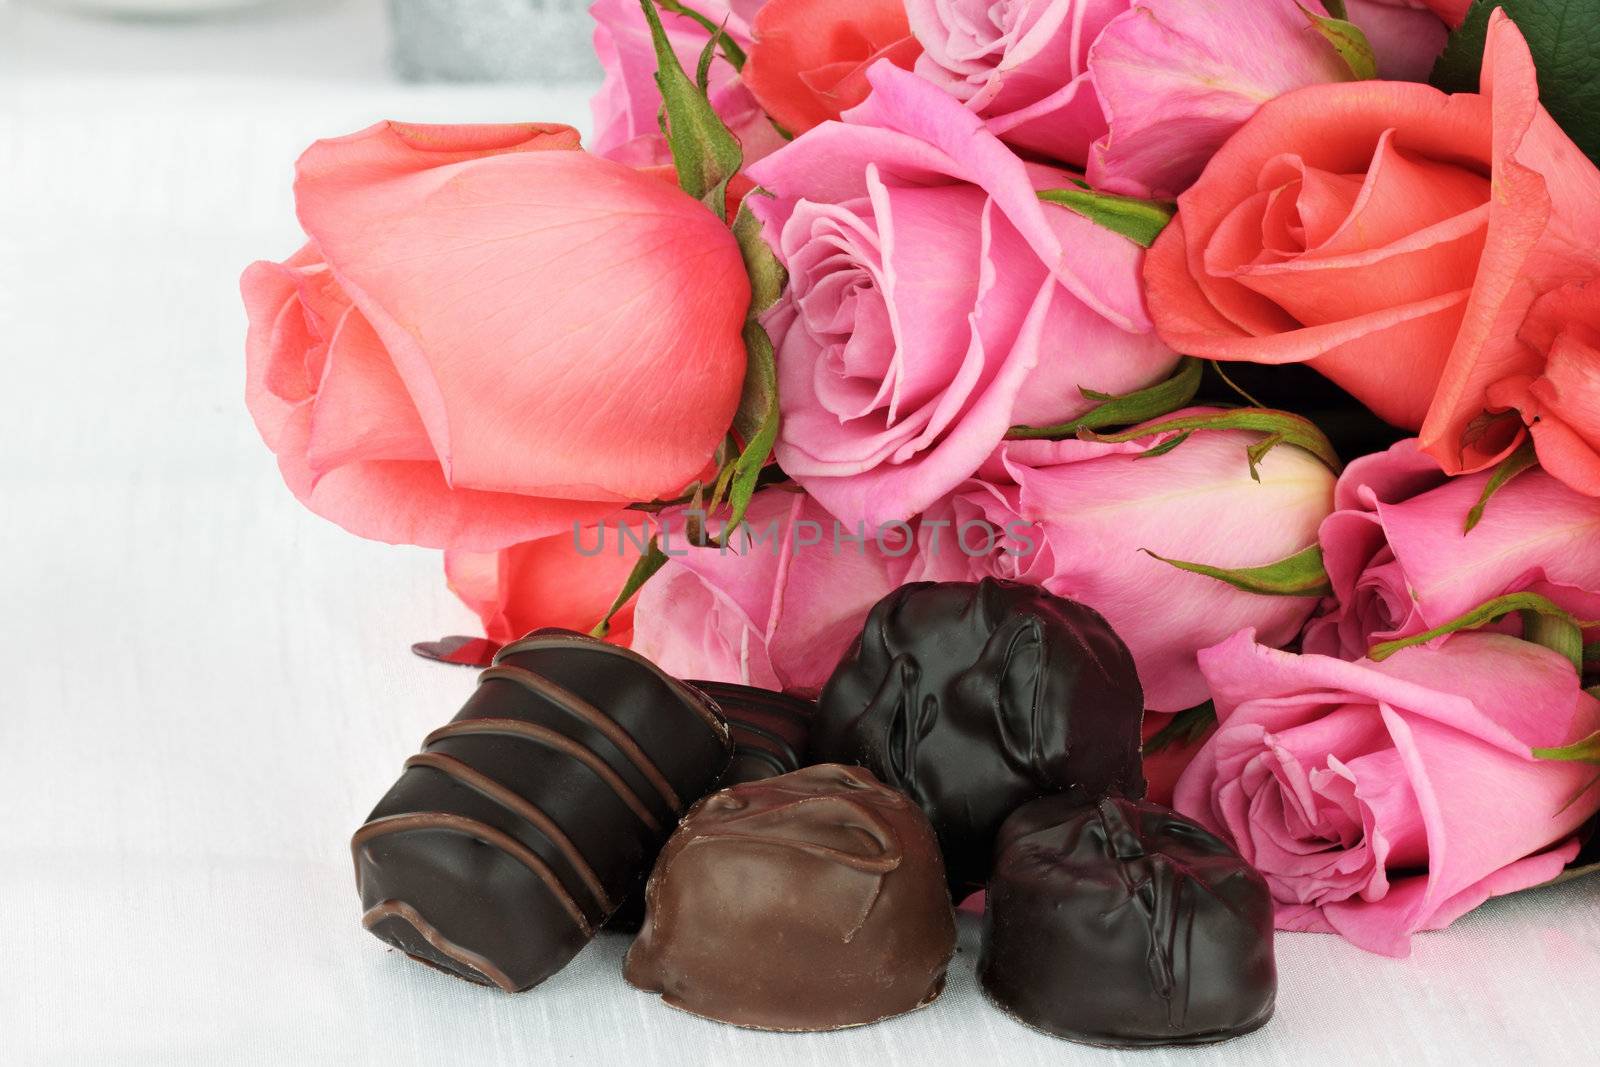 Chocolate Candies and Bouquet of Roses by StephanieFrey